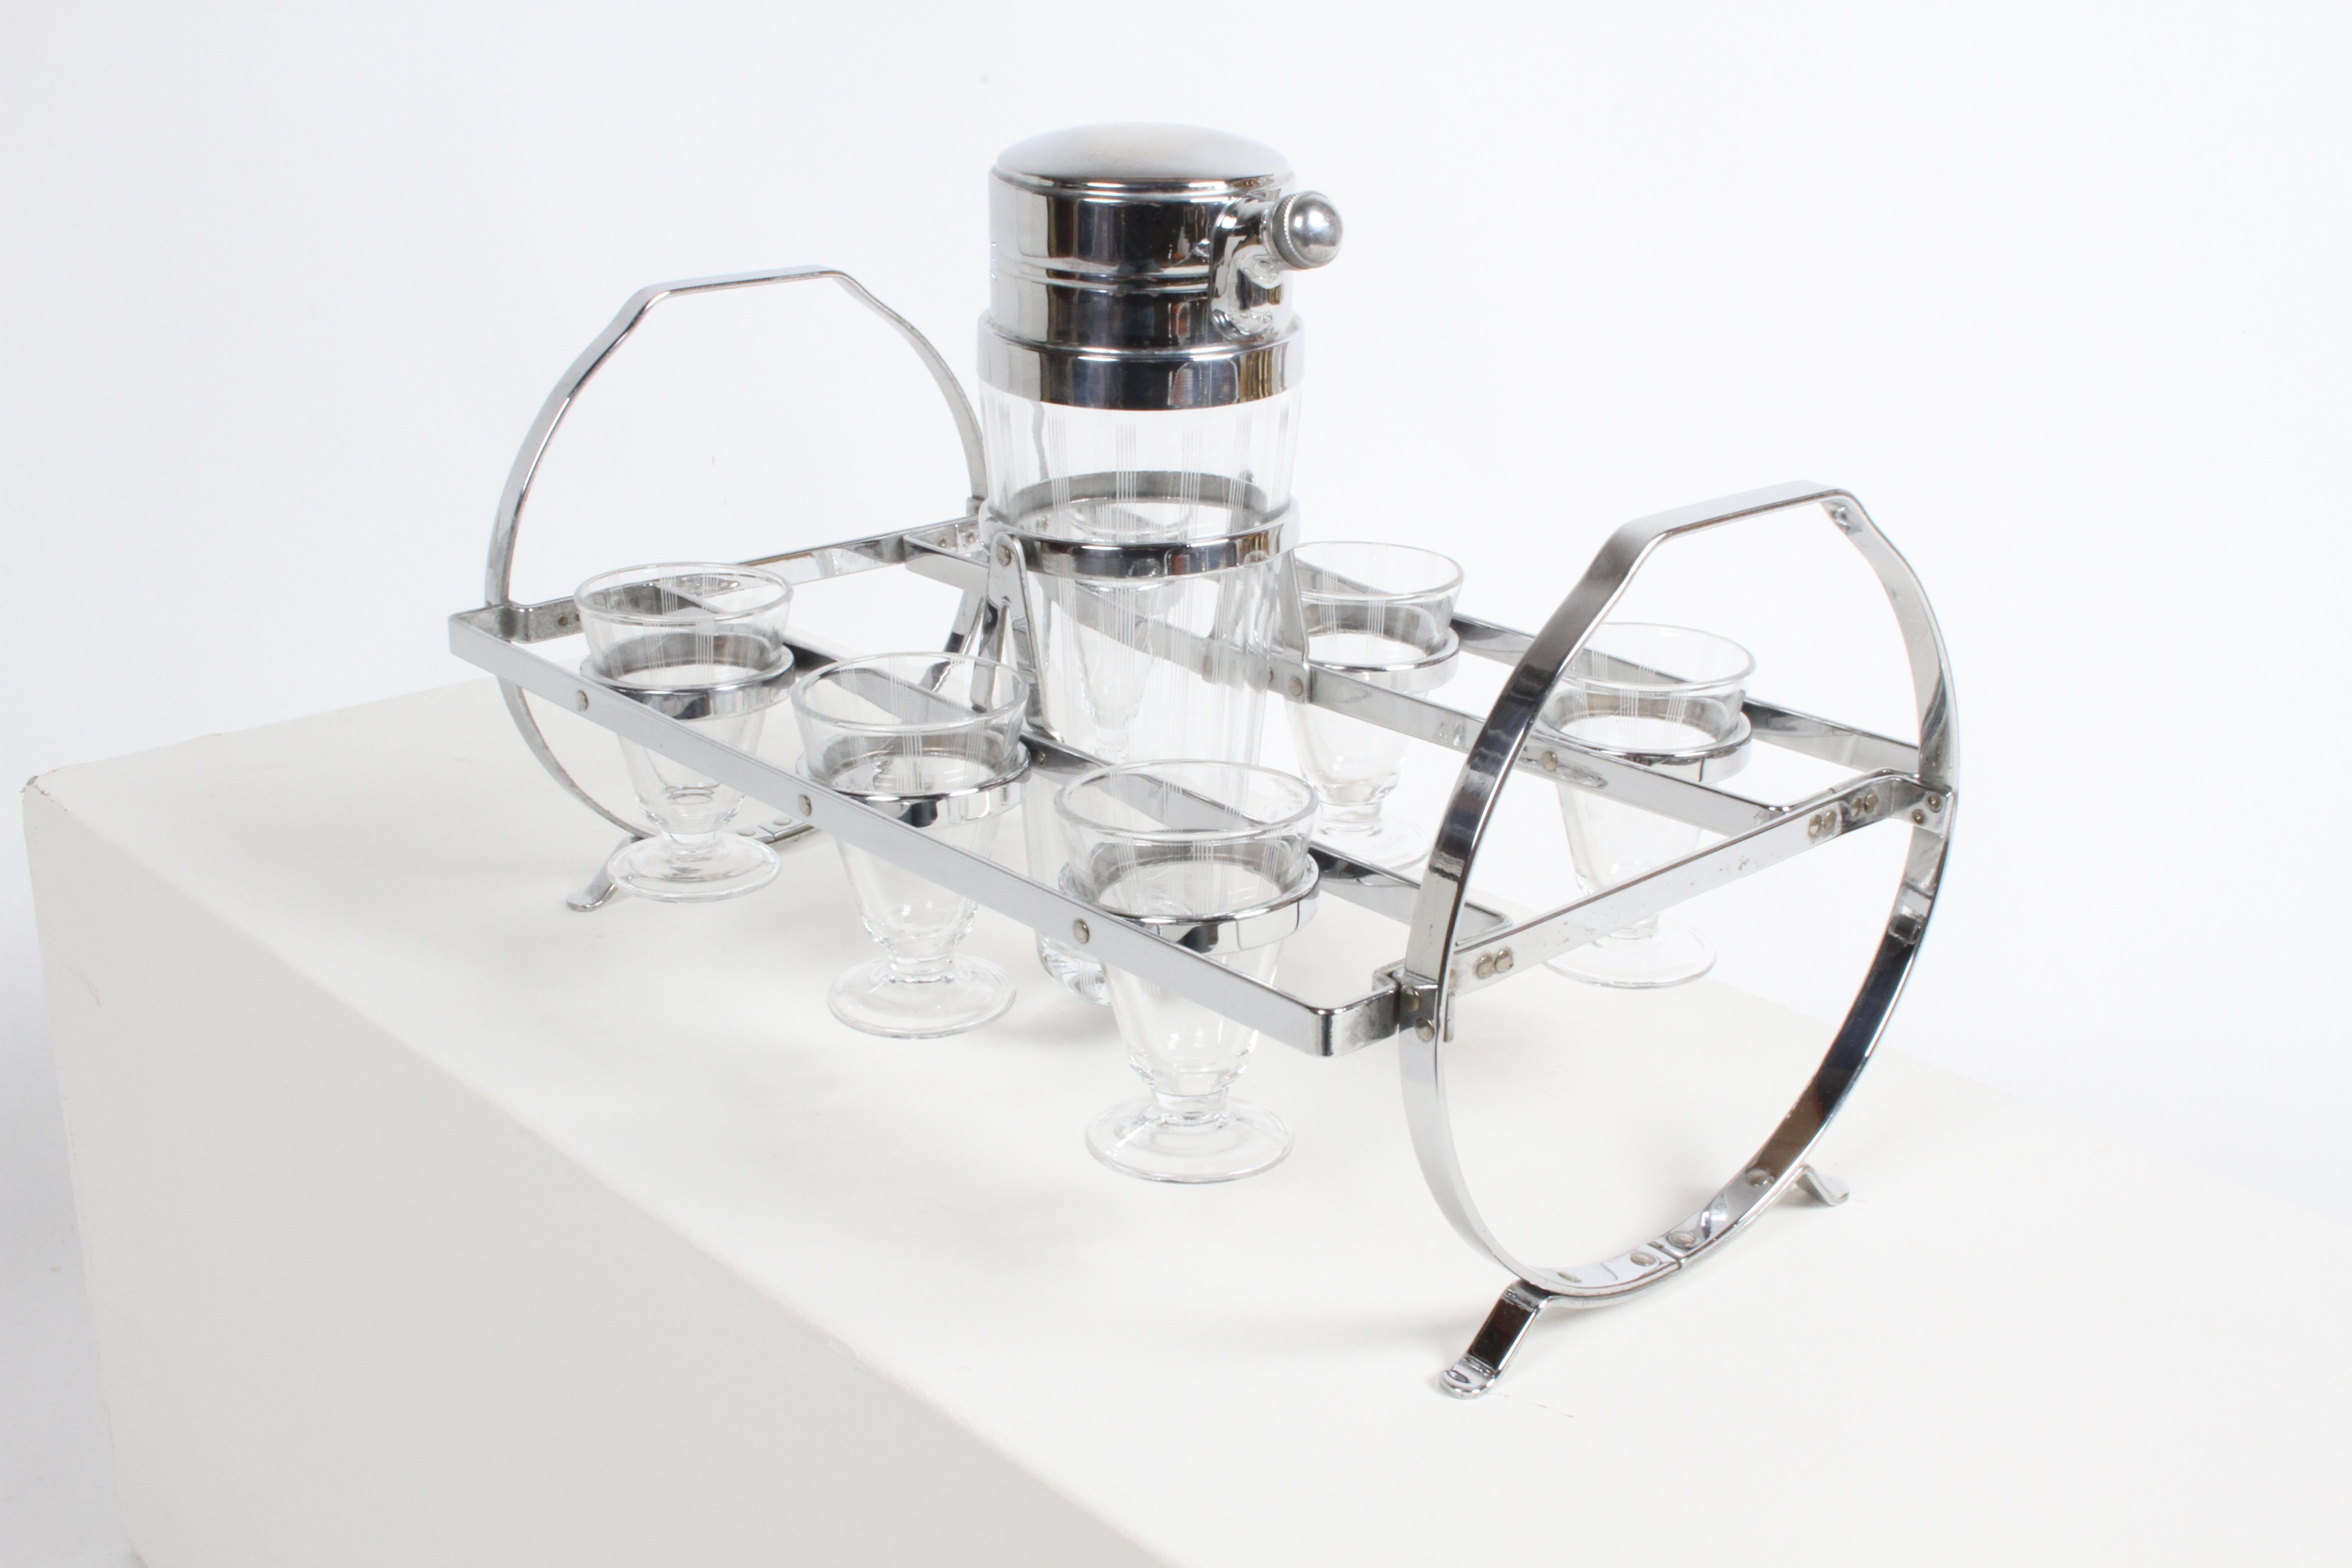 1930s Art Deco Chrome Cocktail Shaker with Six Glasses on Gyroscopic Caddy Stand For Sale 4